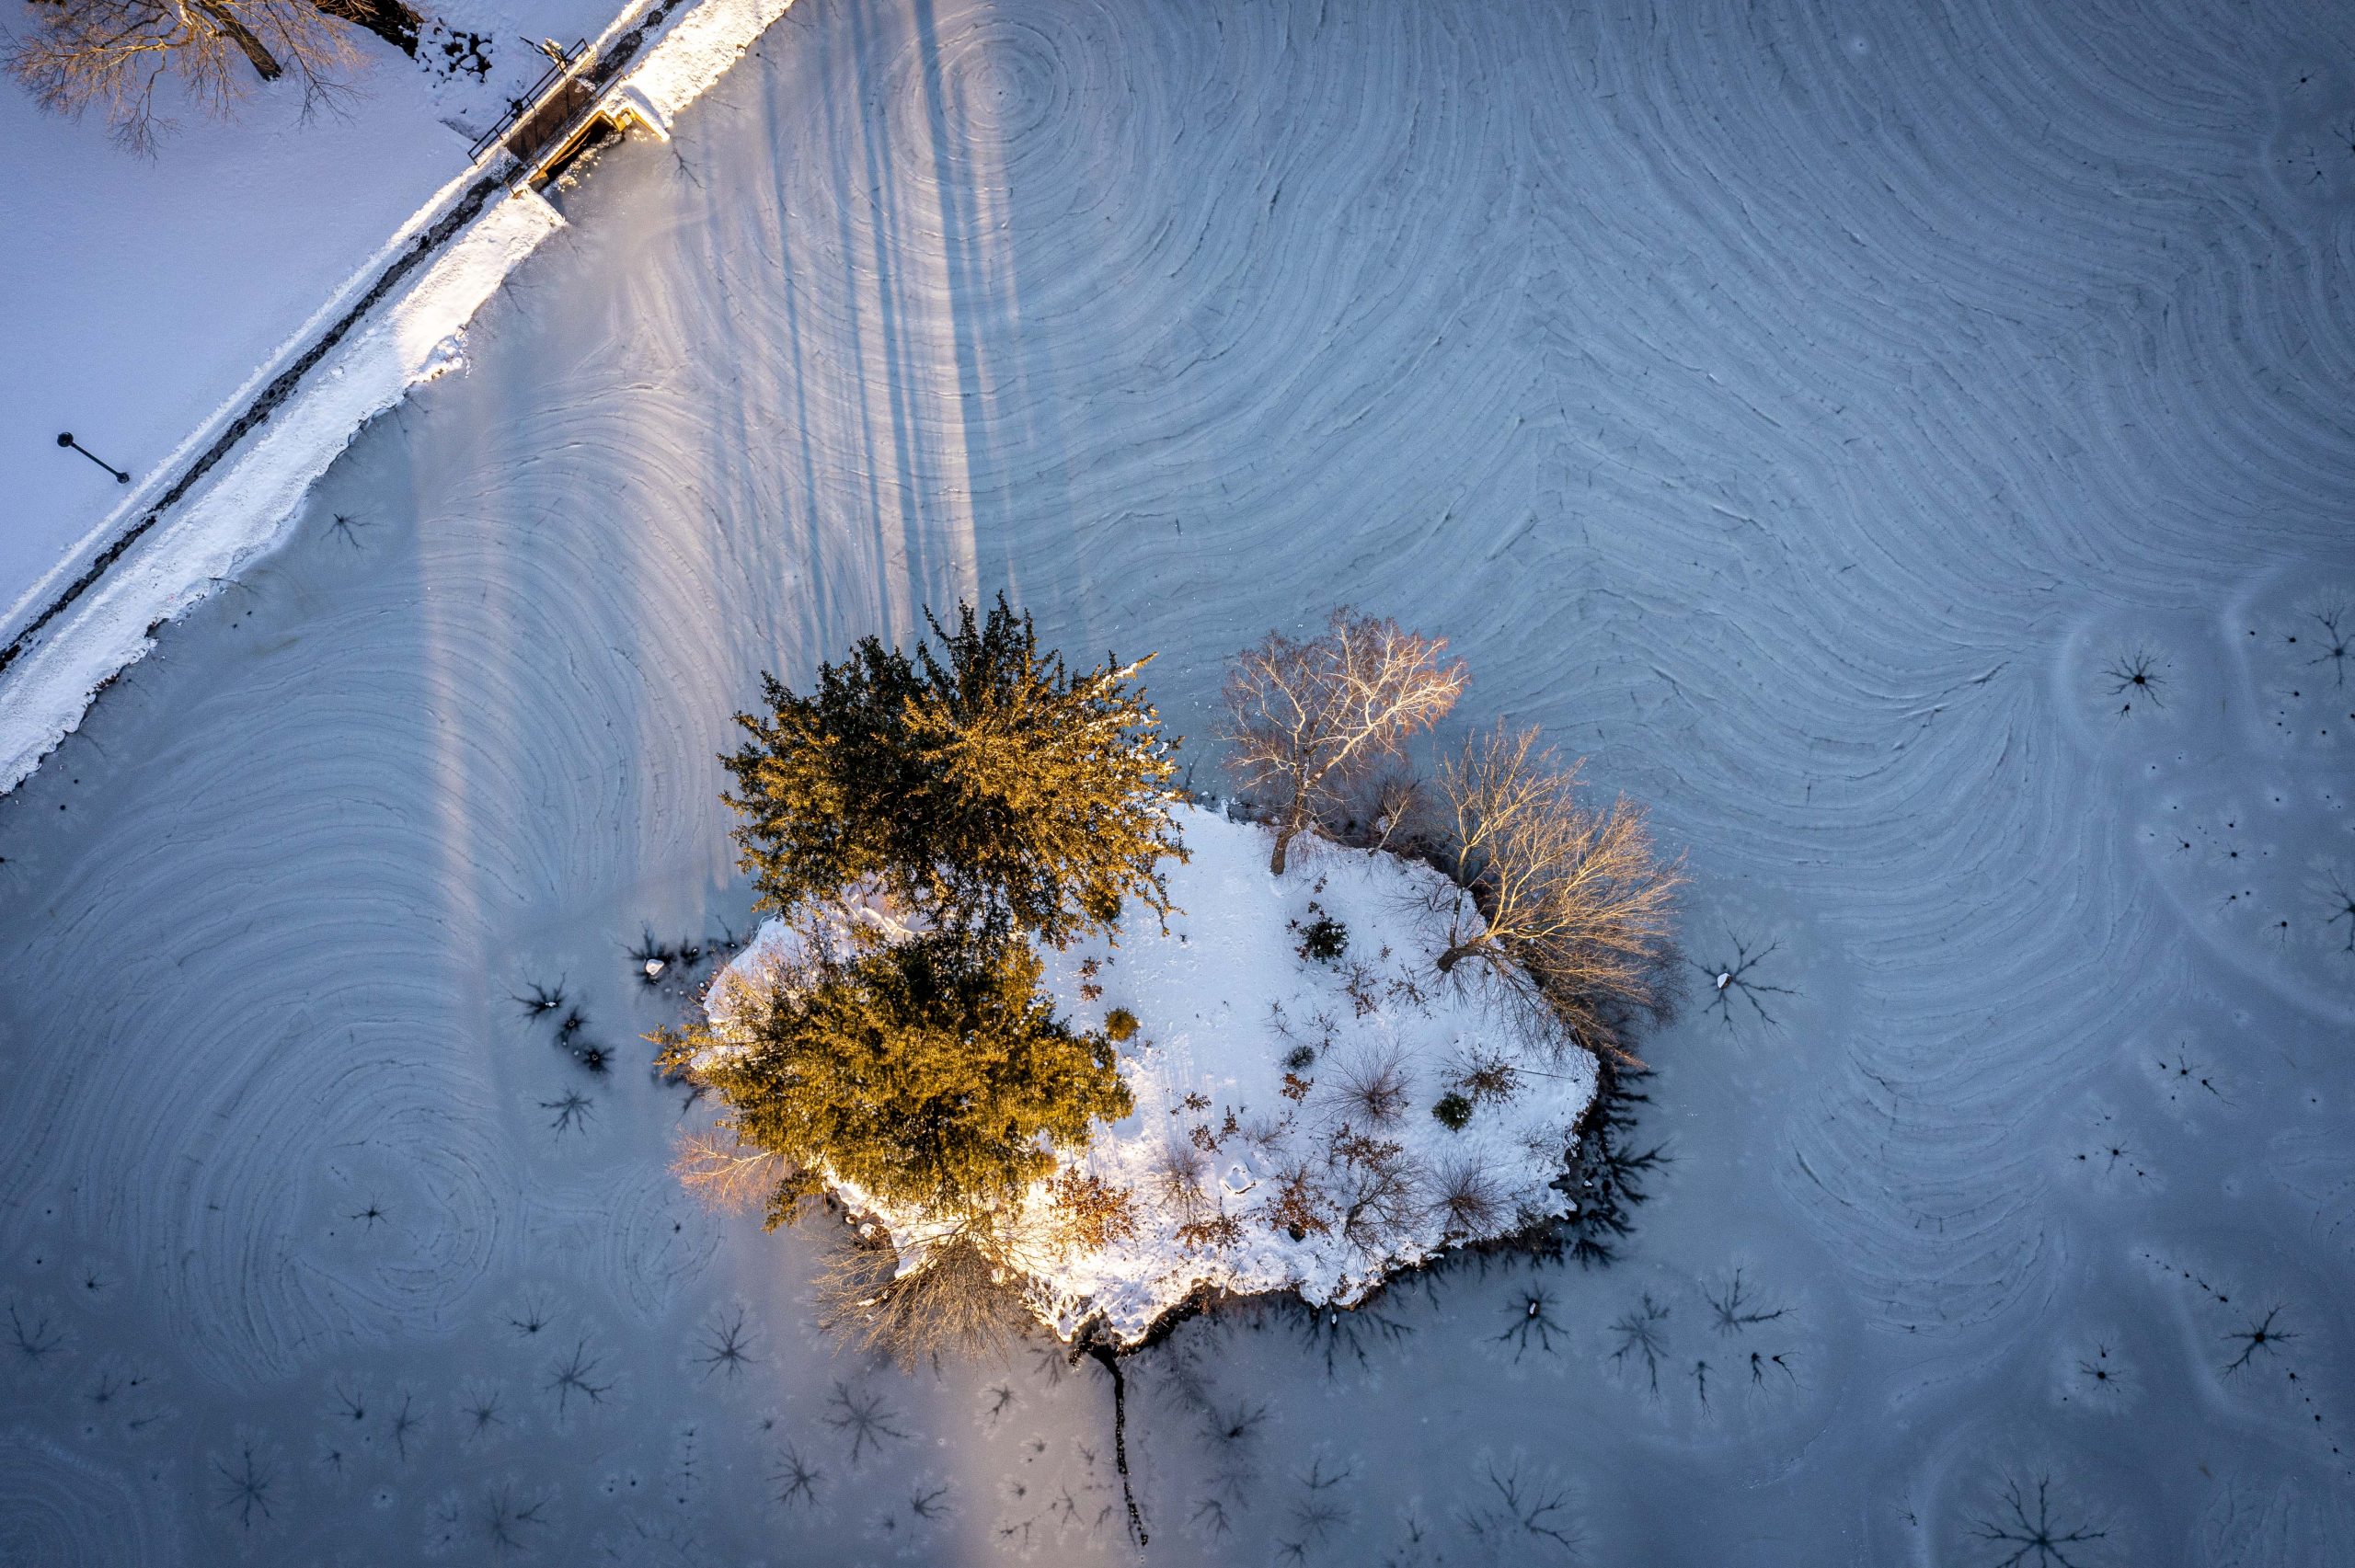 Looking down at ice on Mirror Lake from a drone after a winter snowstorm. Jan. 8, 2022. (Sean Flynn/UConn Photo)